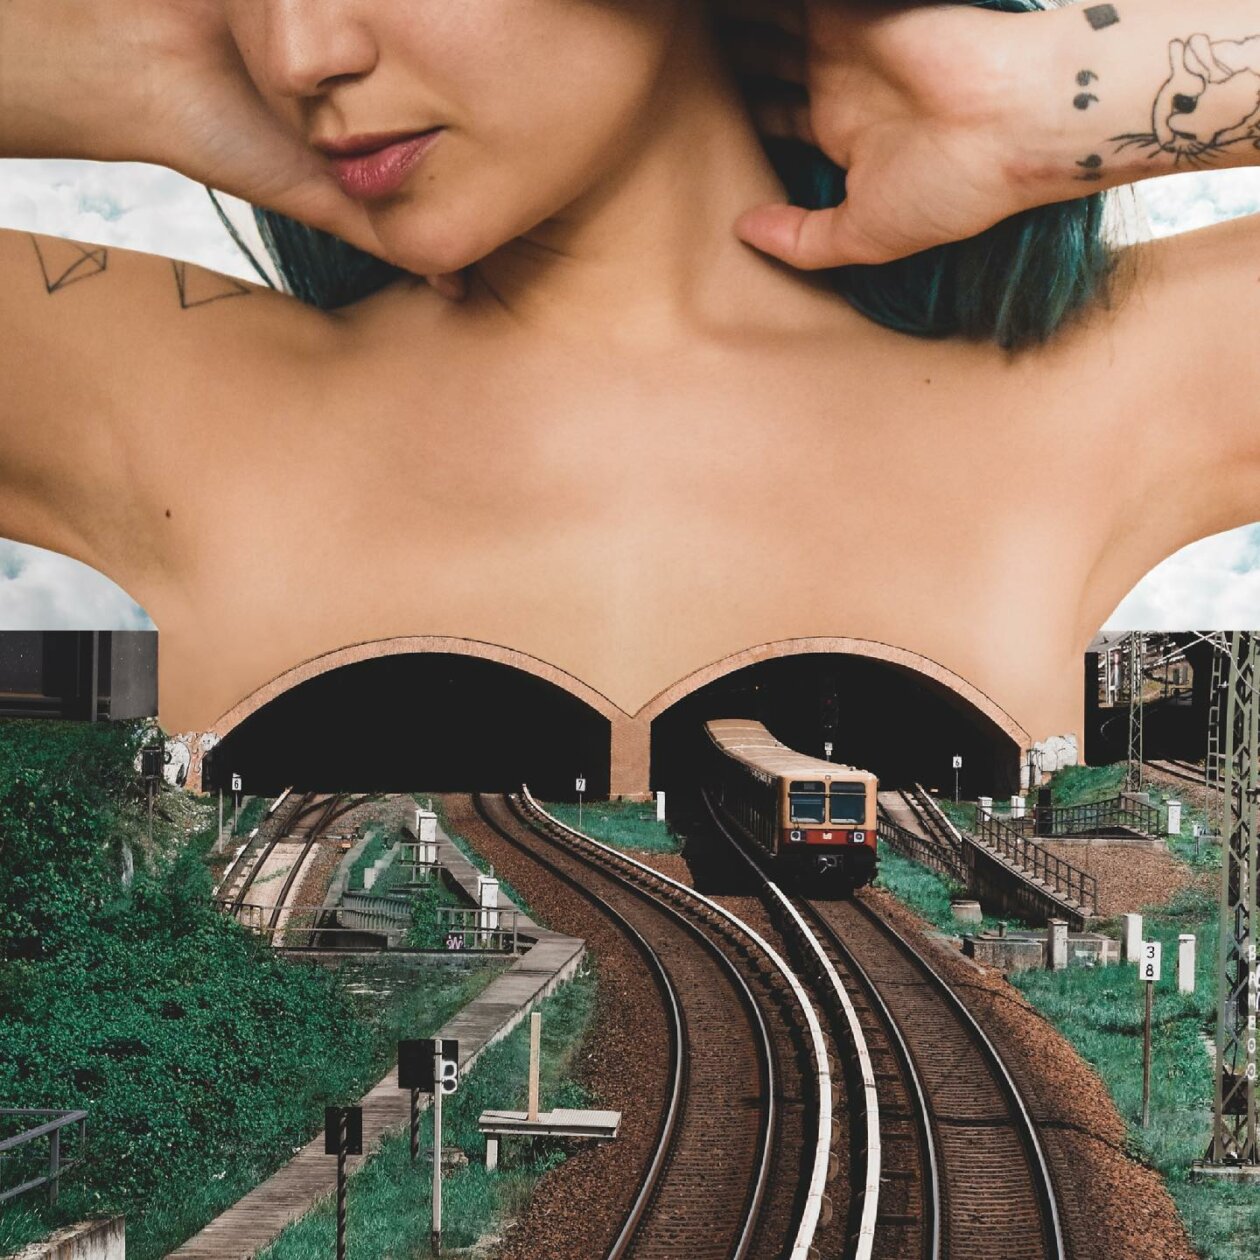 Similar Things Combined Into Surreal Photo Manipulations By Monica Carvalho 8